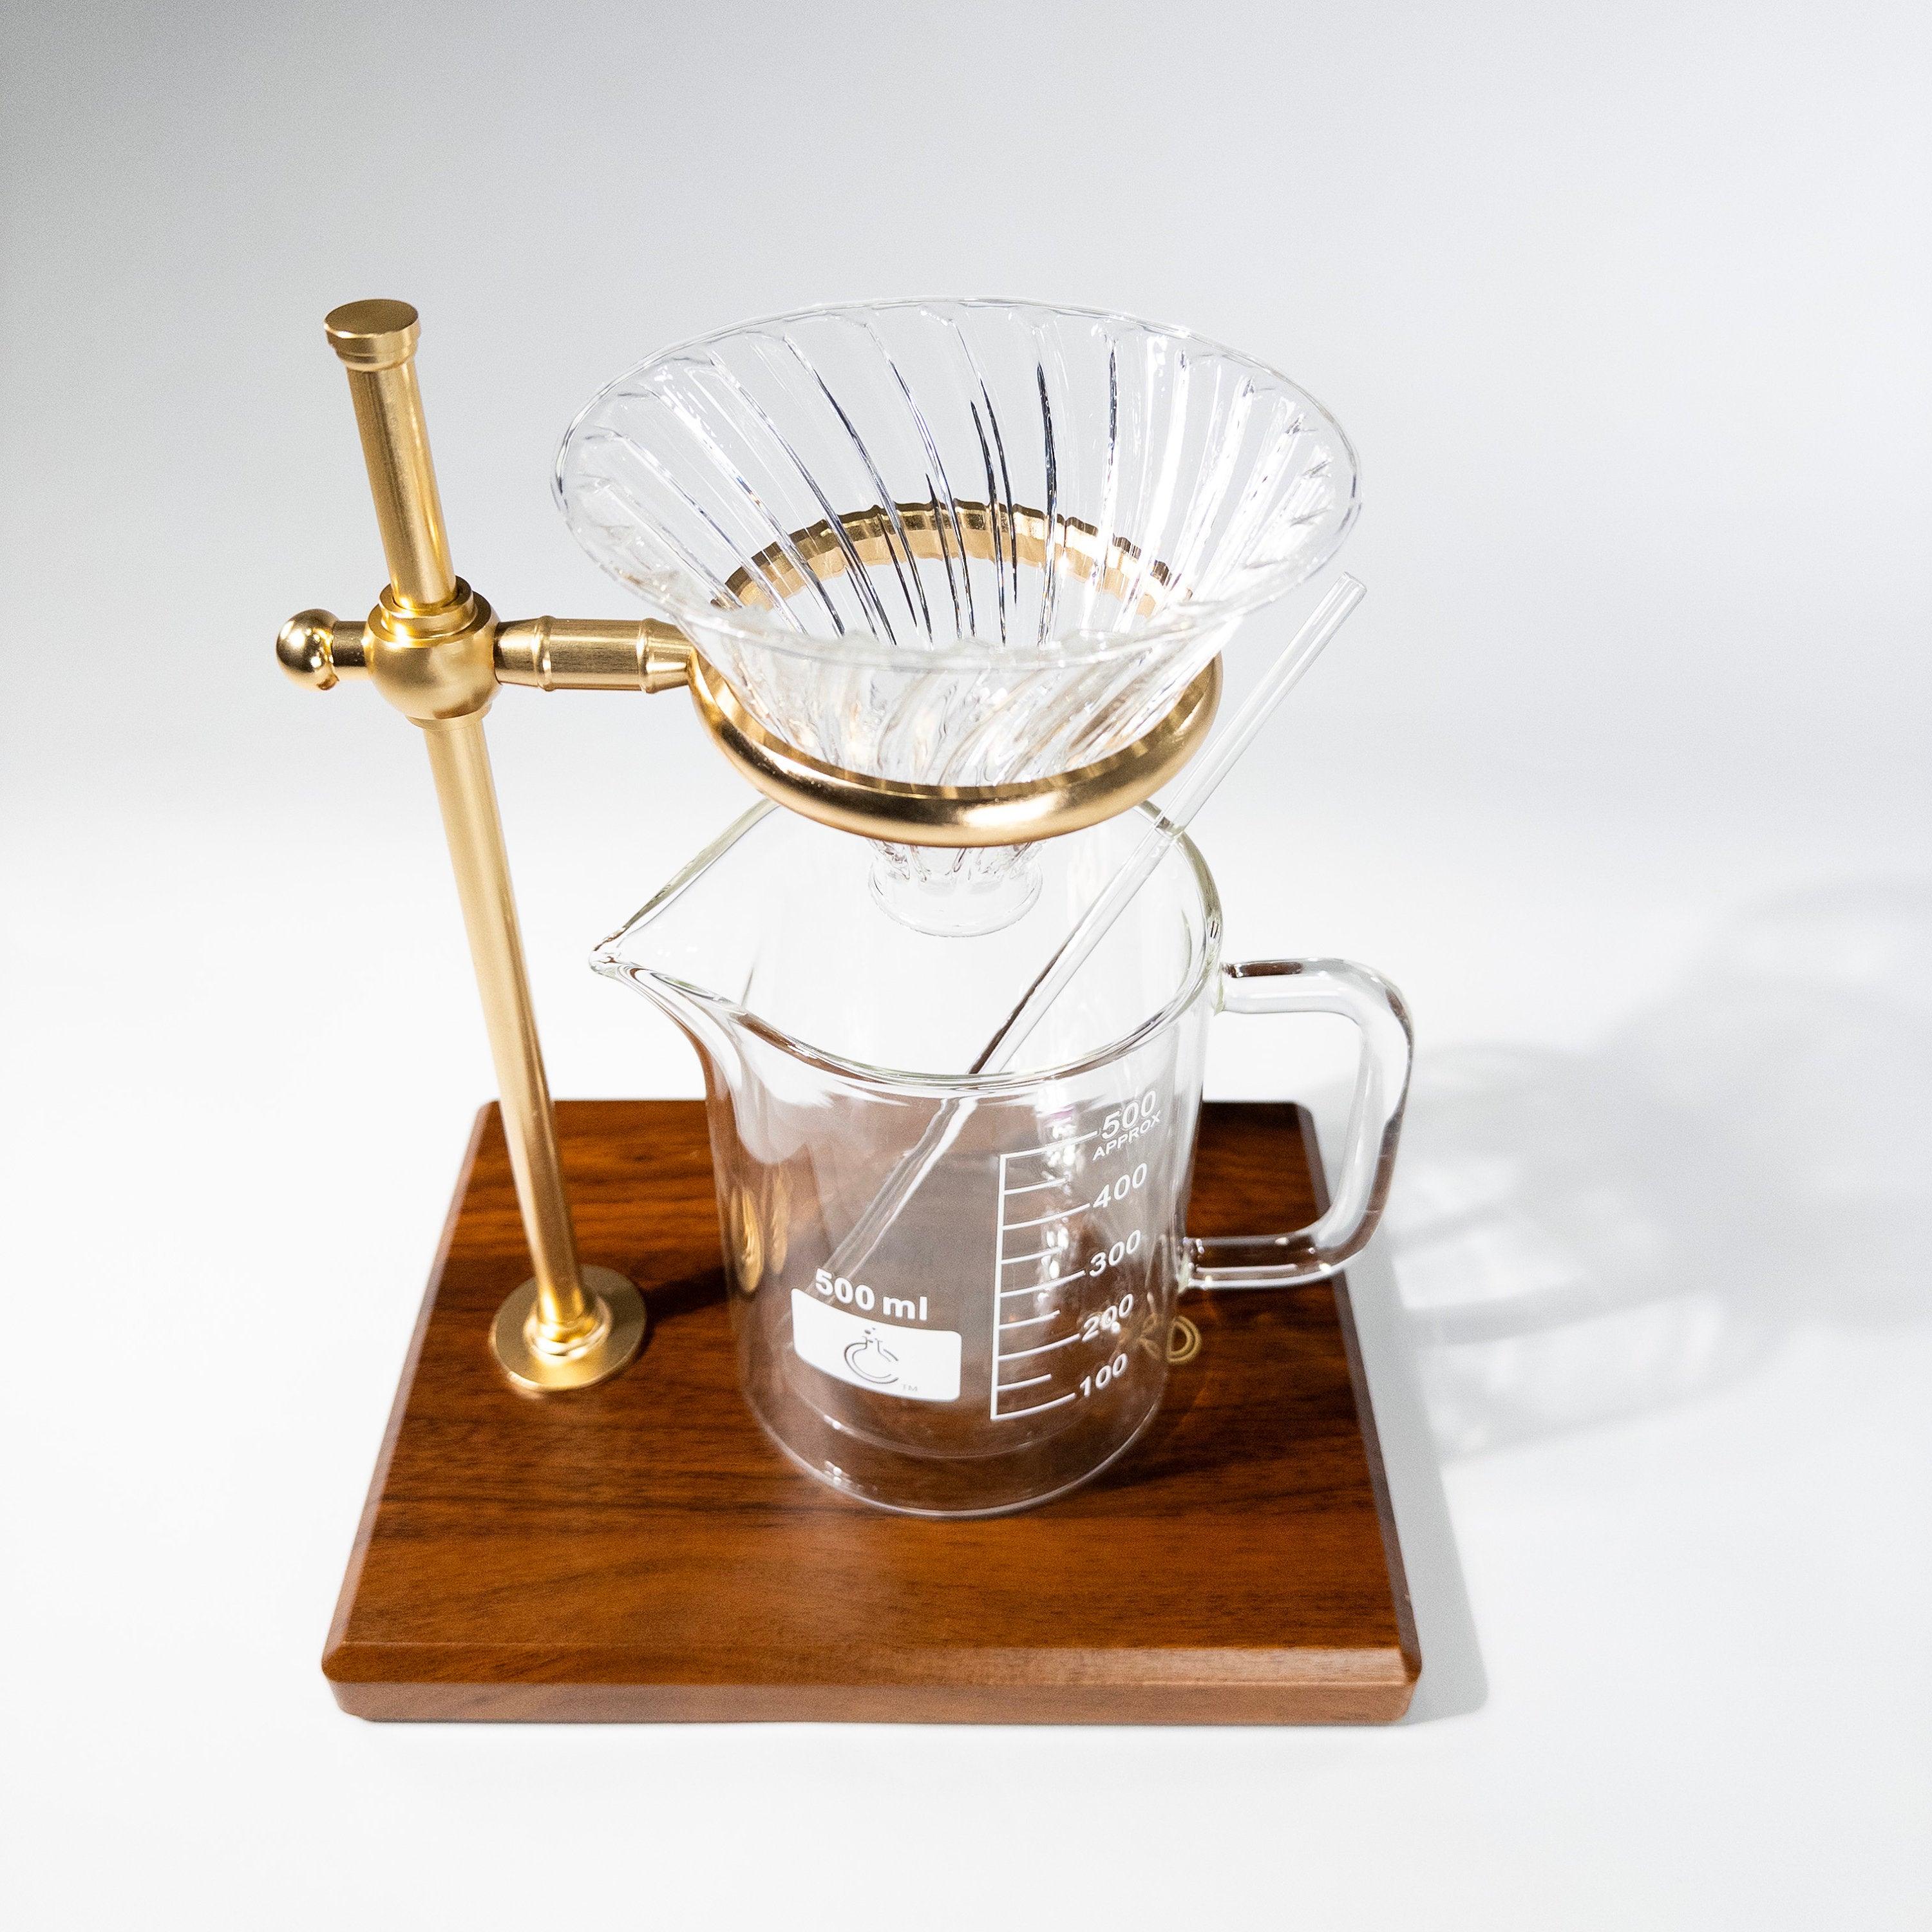 Pour-over coffee maker set makes a perfect STEM graduation or birthday gift for science enthusiasts. The set comes with a wood and gold ring stand, a glass funnel, a double wall insulated beaker mug, glass stir rod and a pack of paper coffee filters